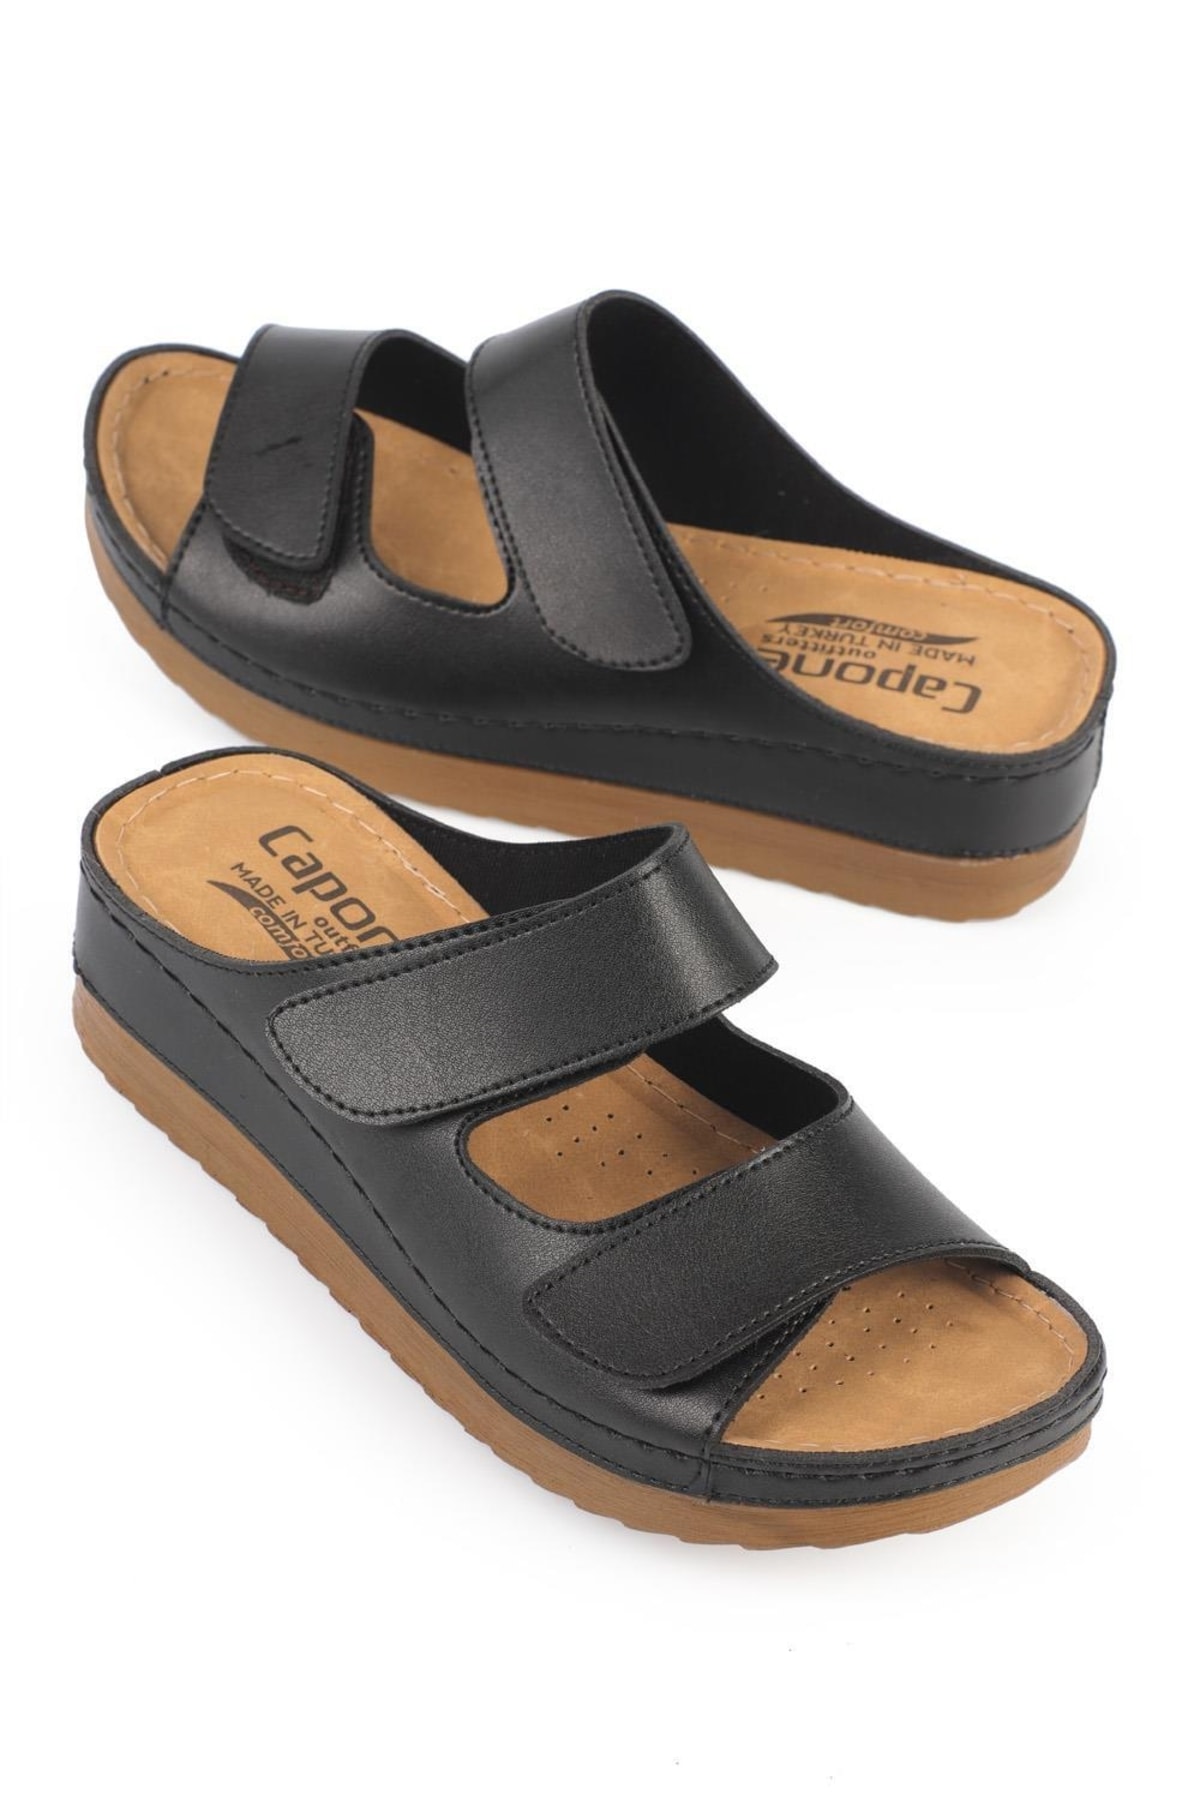 Capone Outfitters 2737 Women's Slippers